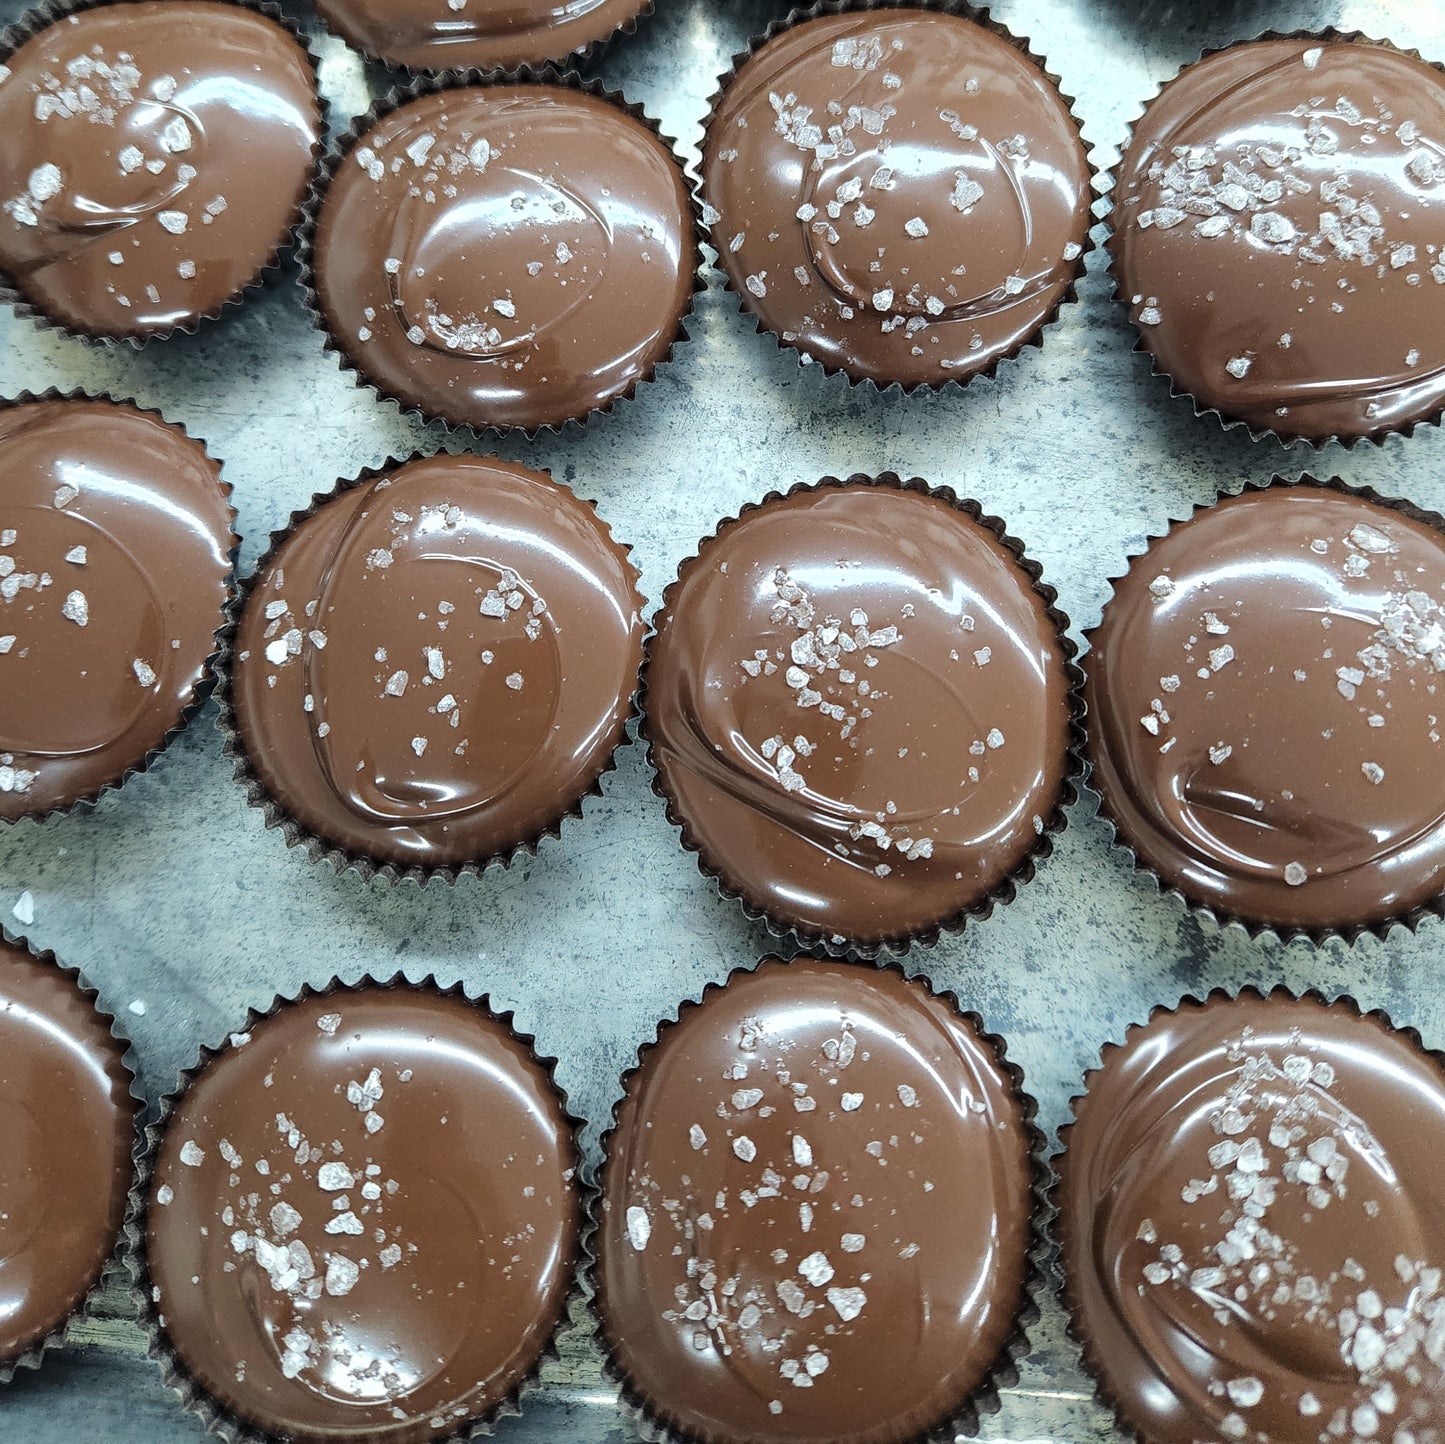 Finished tray of Milk Chocolate Sea Salt Caramel Cups made by Stage Stop Candy